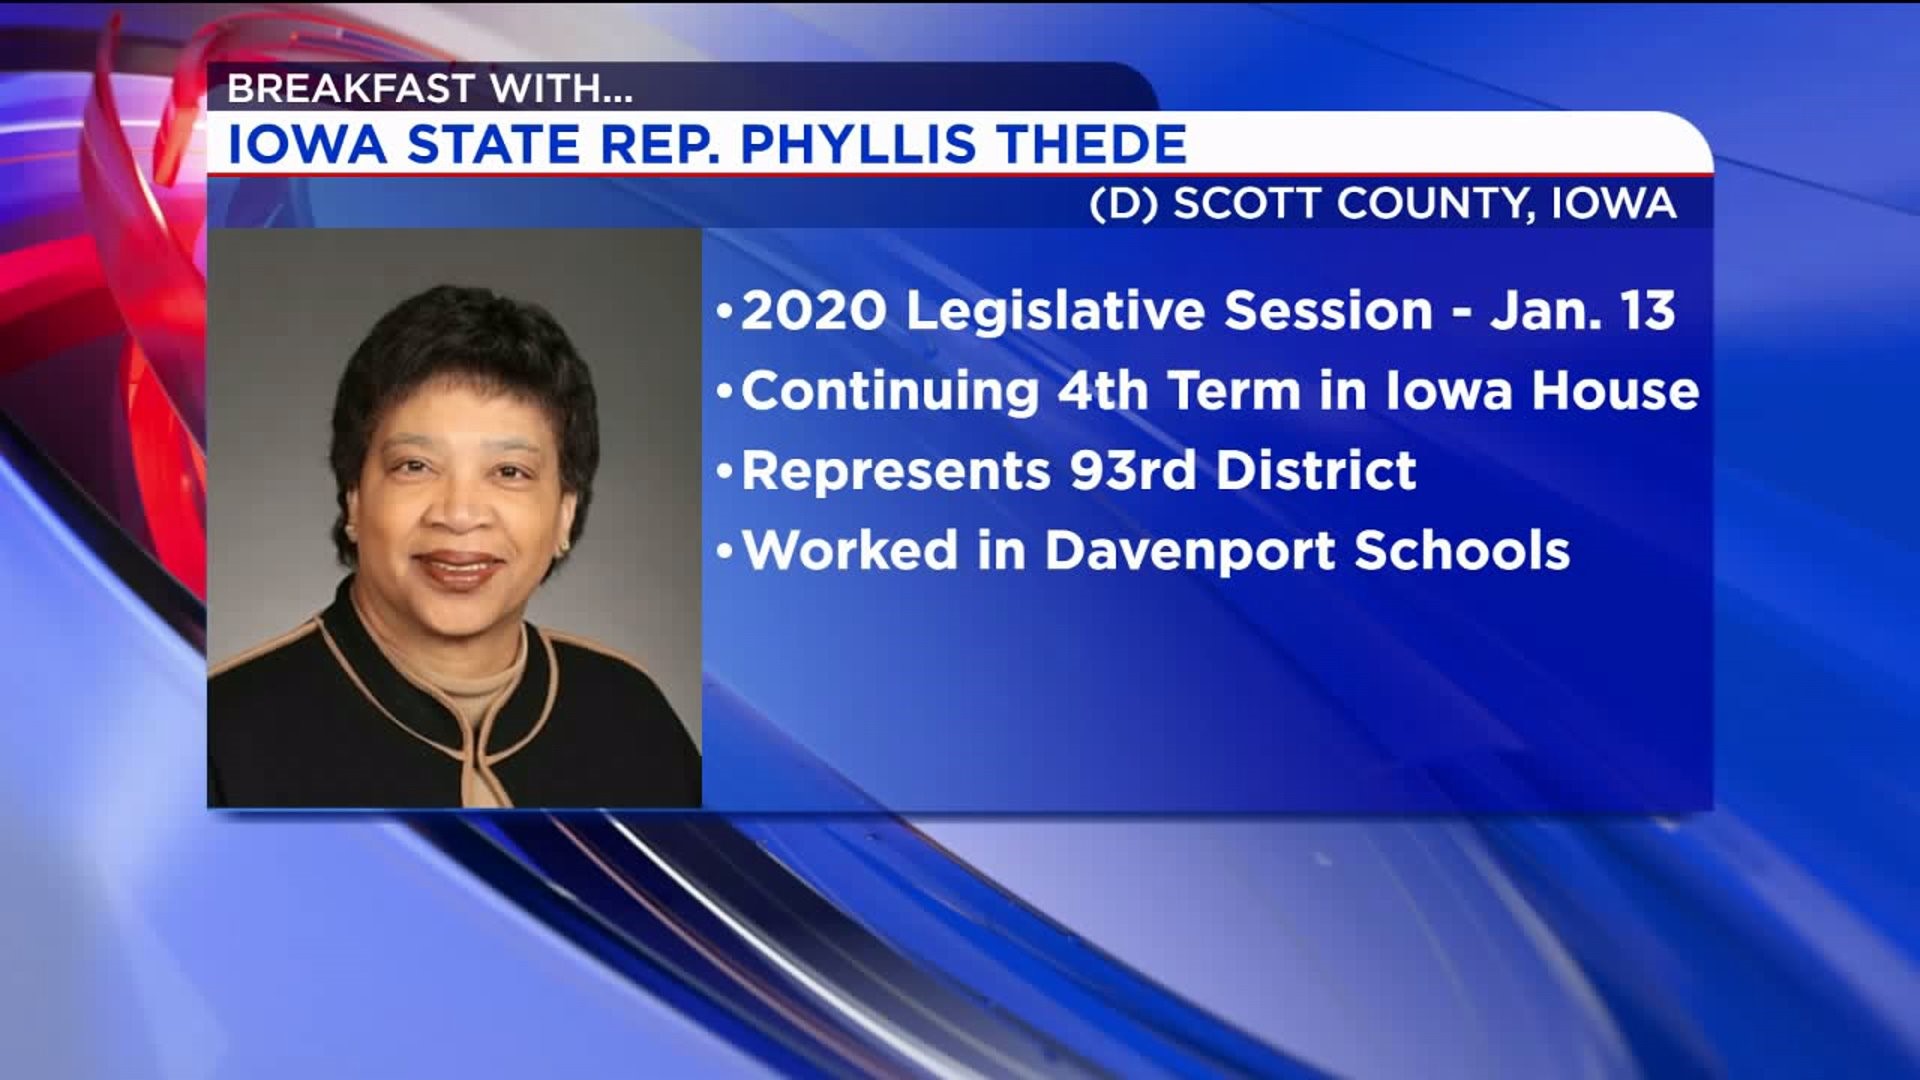 Breakfast With... Iowa State Representative Phyllis Thede: Who She Is